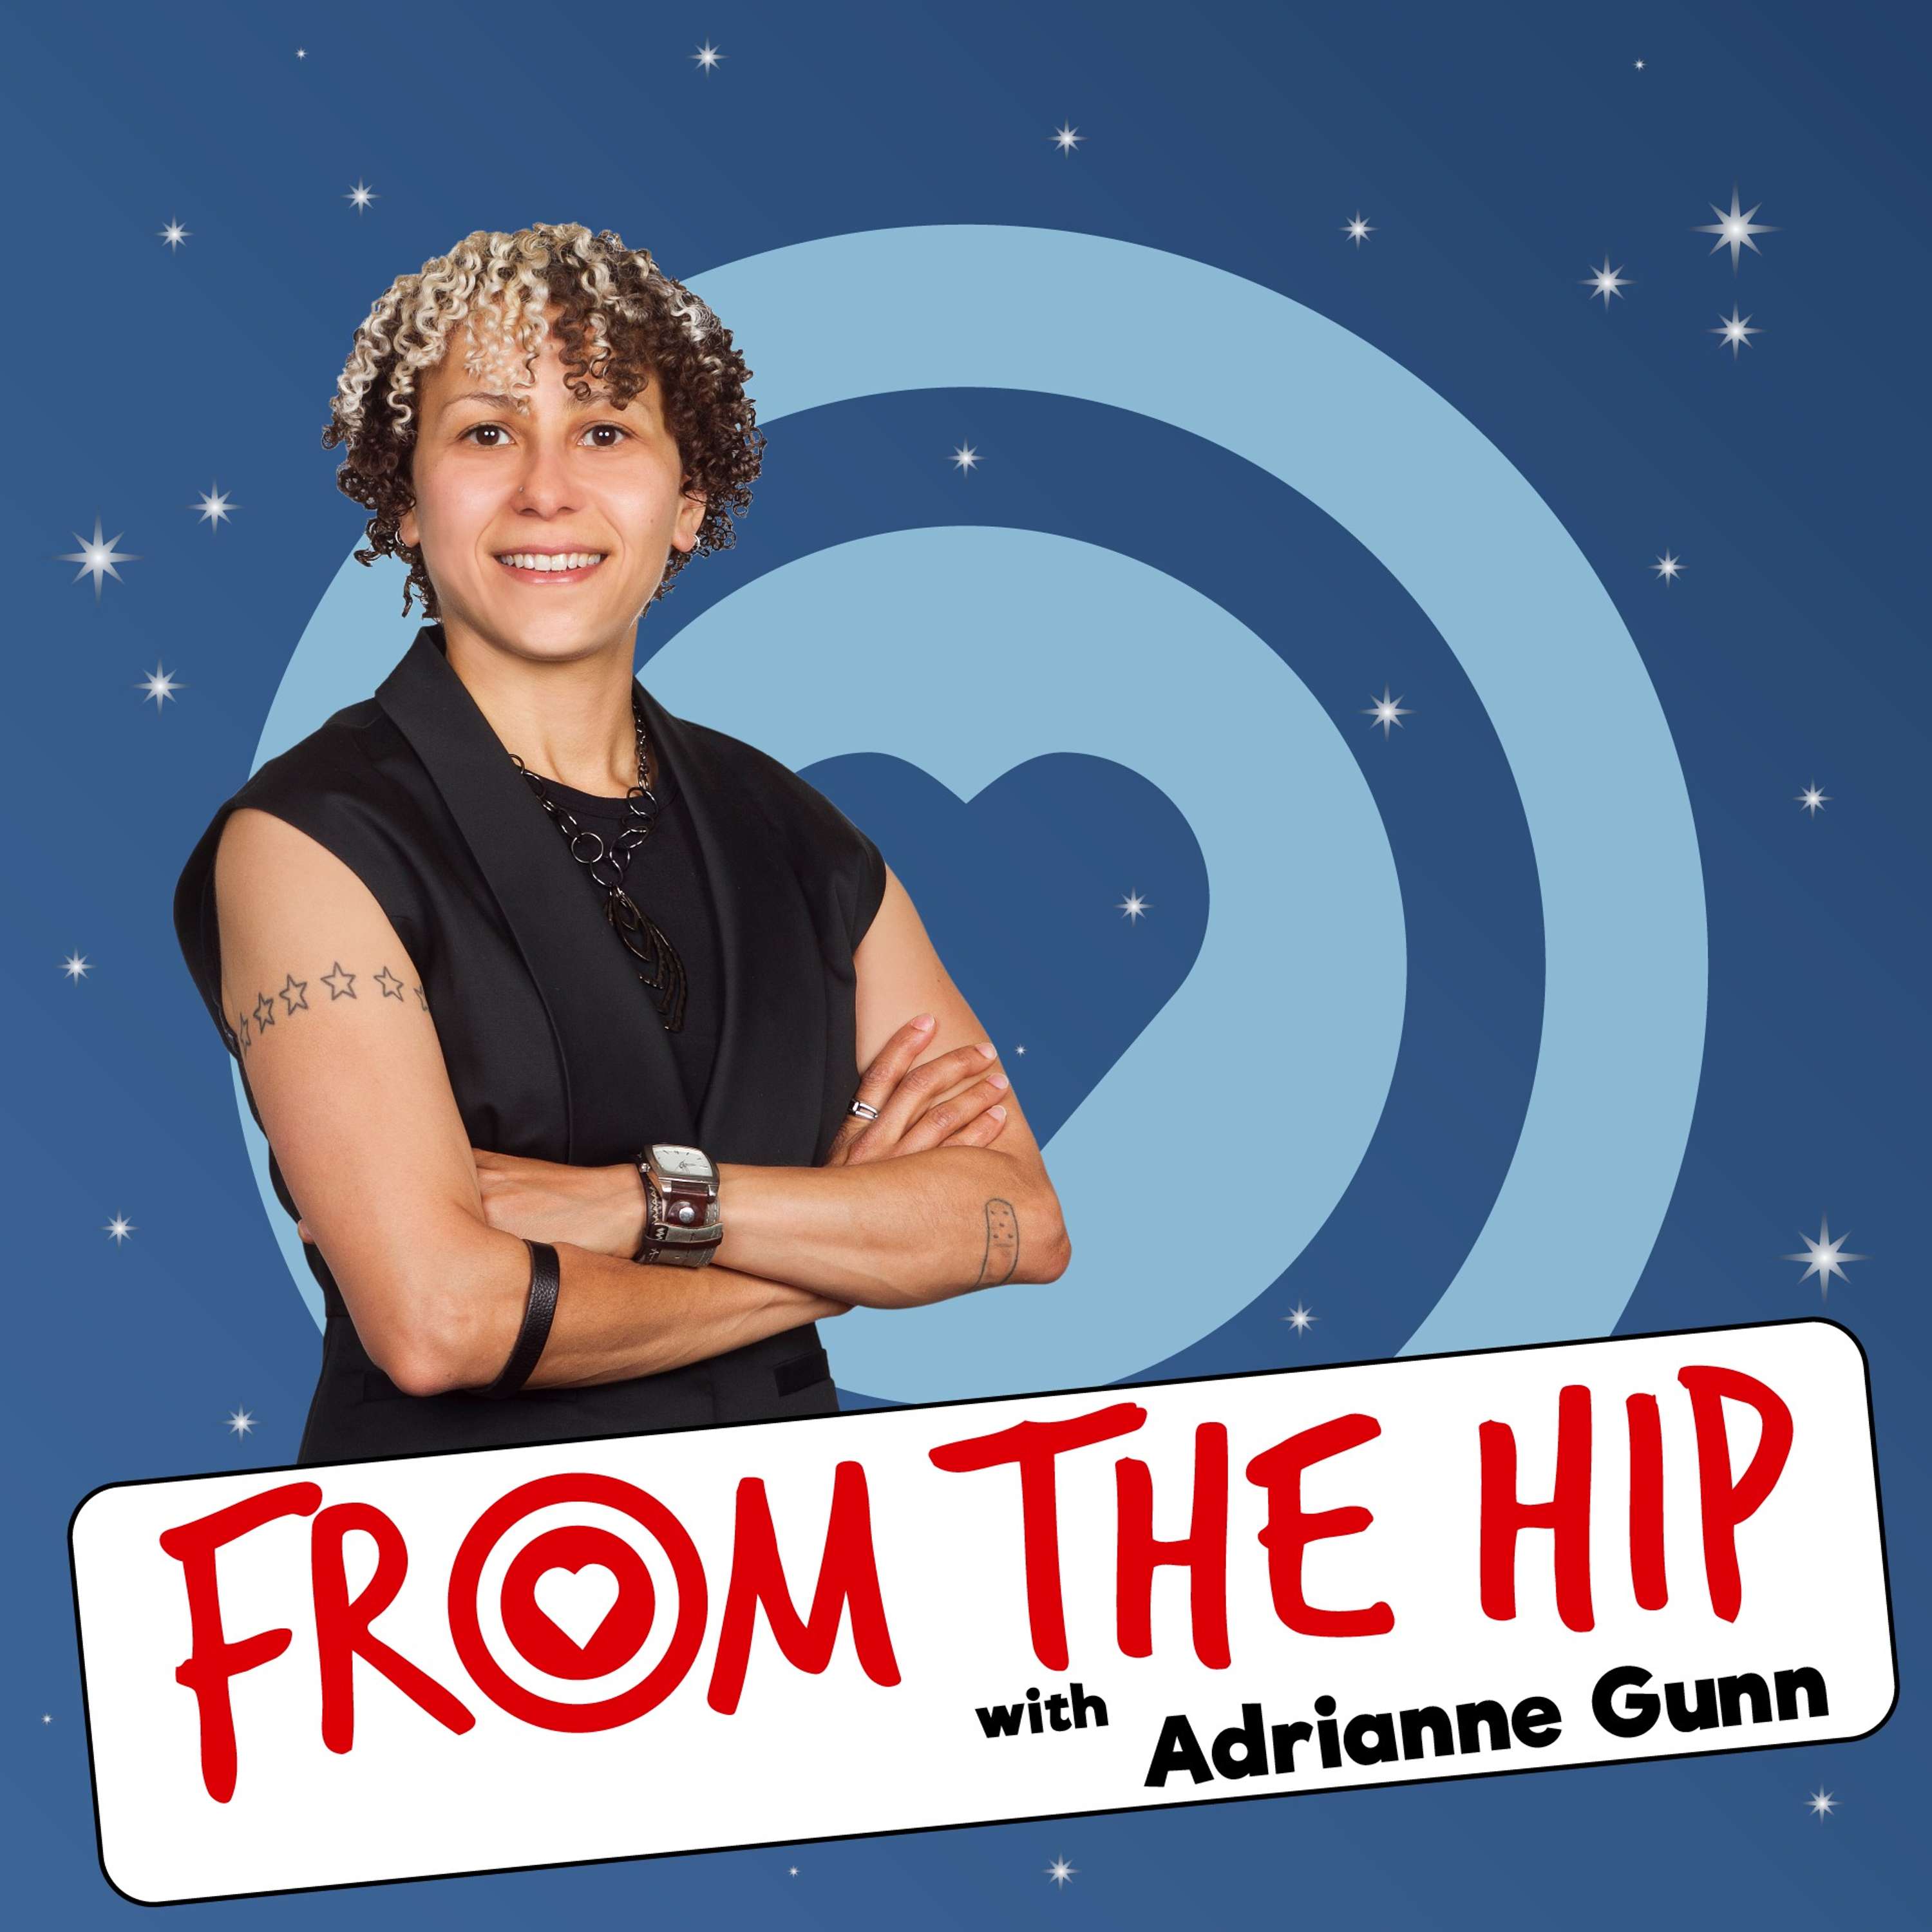 From the Hip with Adrianne Gunn